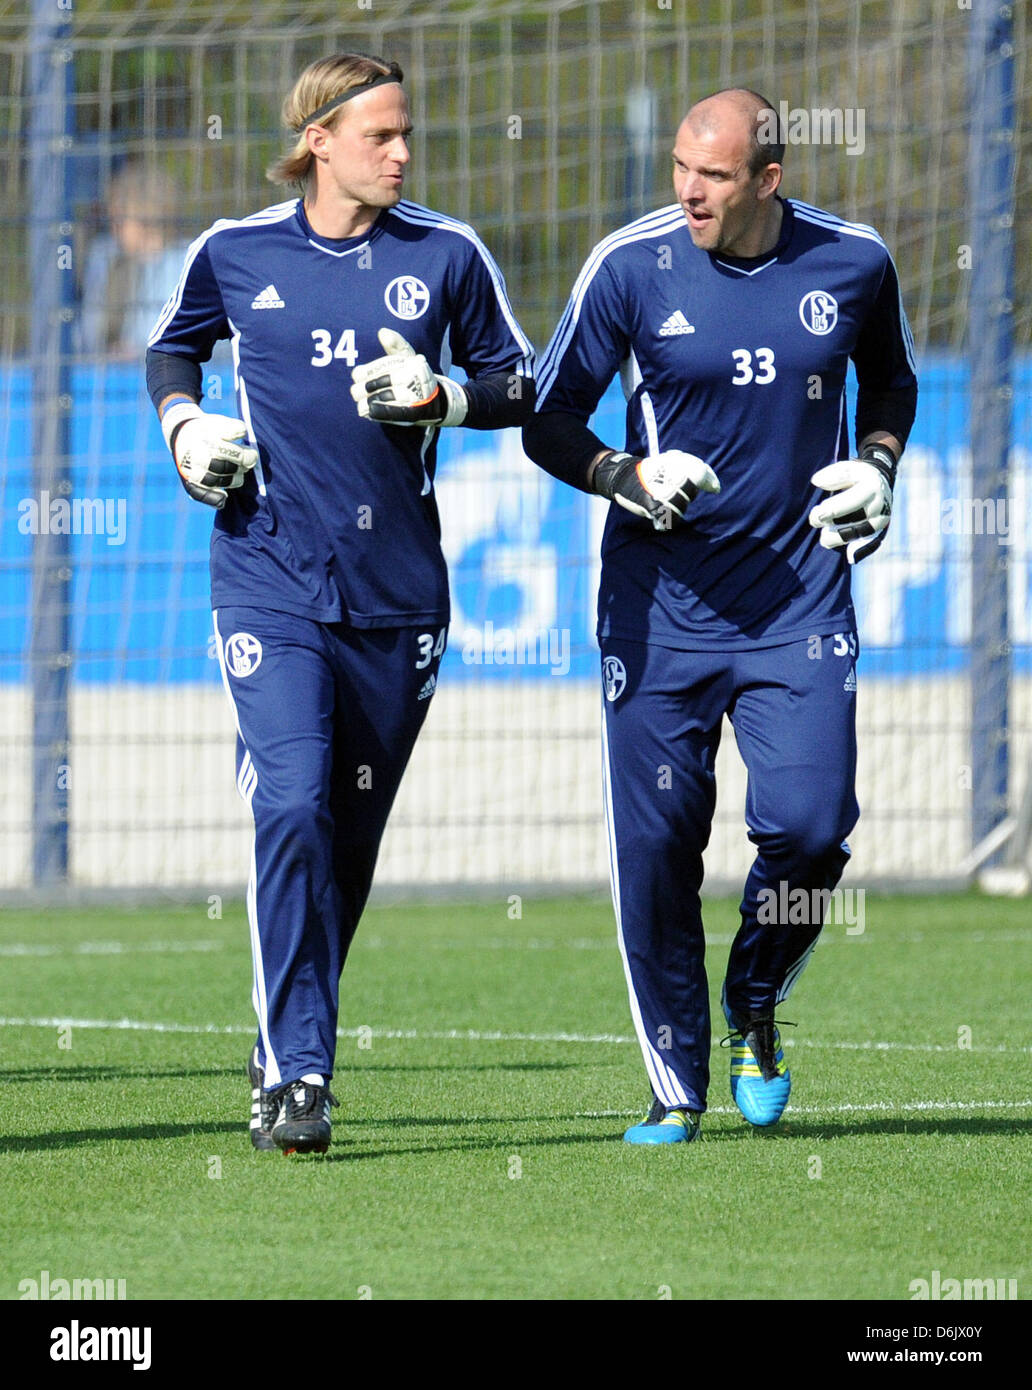 Schalke's goalkeeper Timo Hildebrand (L) and Mathias Schober take part in training at Arena Aufschalke in Gelsenkirchen, Germany, 28 March 2012. FC Schalke 04 will play Athletic Bilbao in the quarterfinal of the Europa League on Thursday, 29 March 2012. Photo: CAROLINE SEIDEL Stock Photo